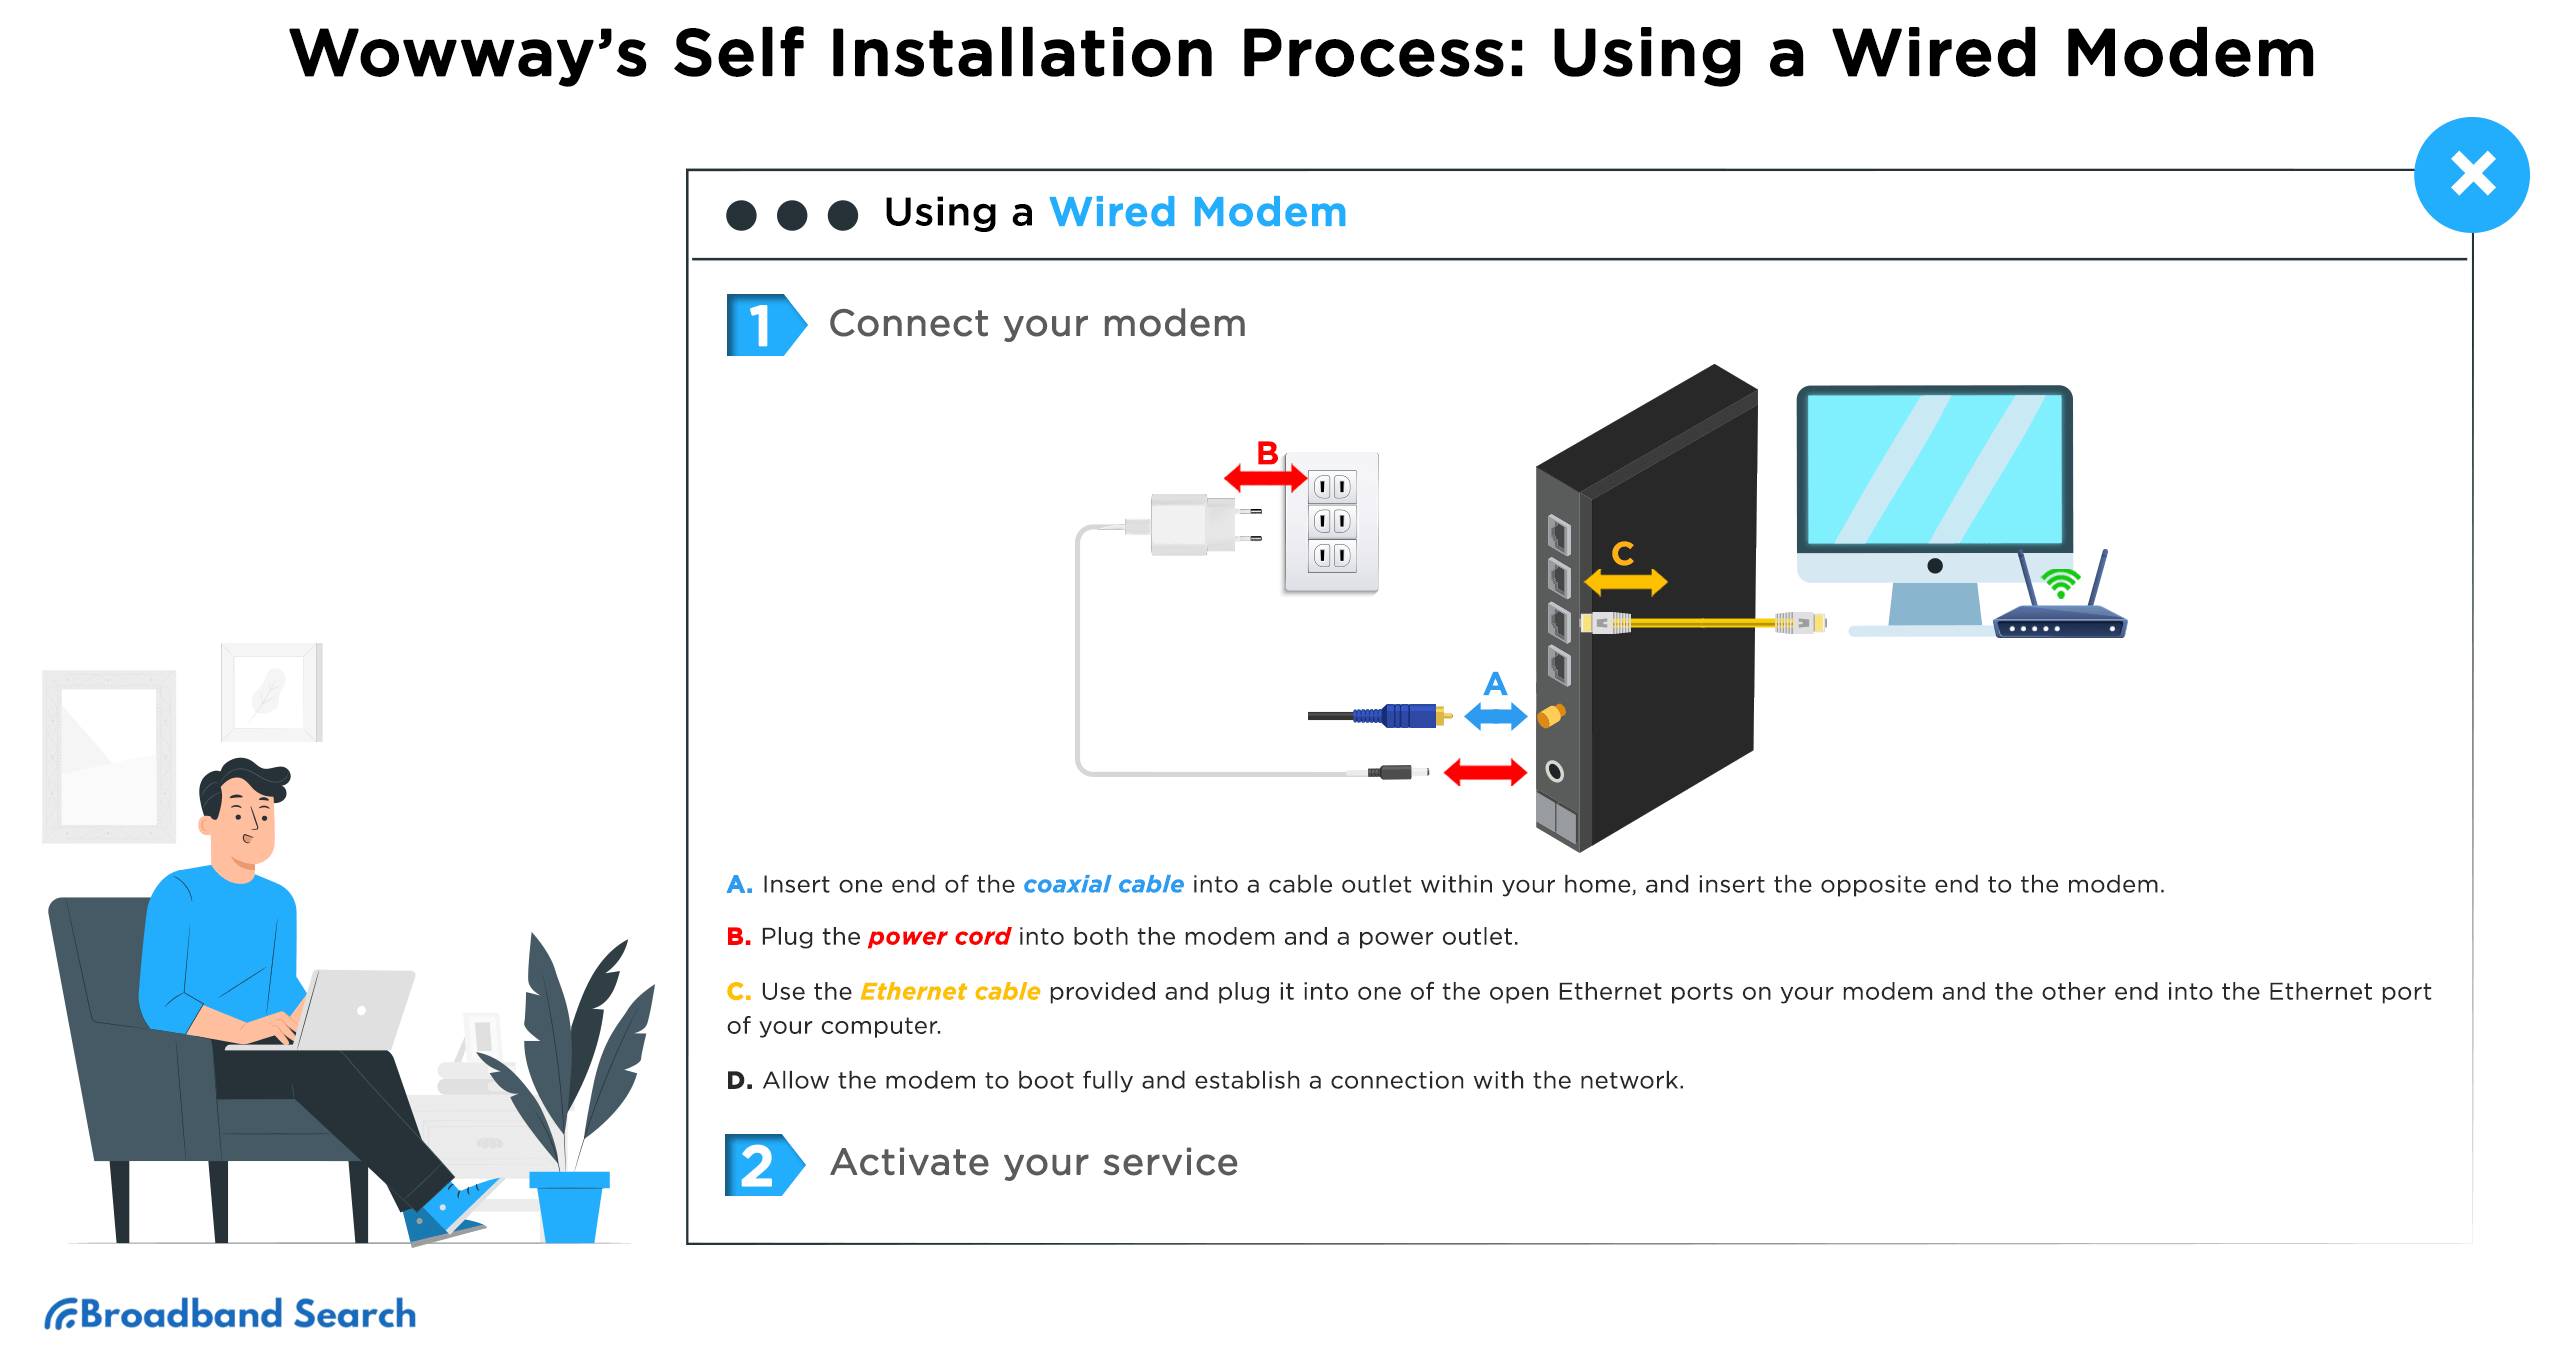 Wowway’s Self Installation Process: Using a Wired Modem